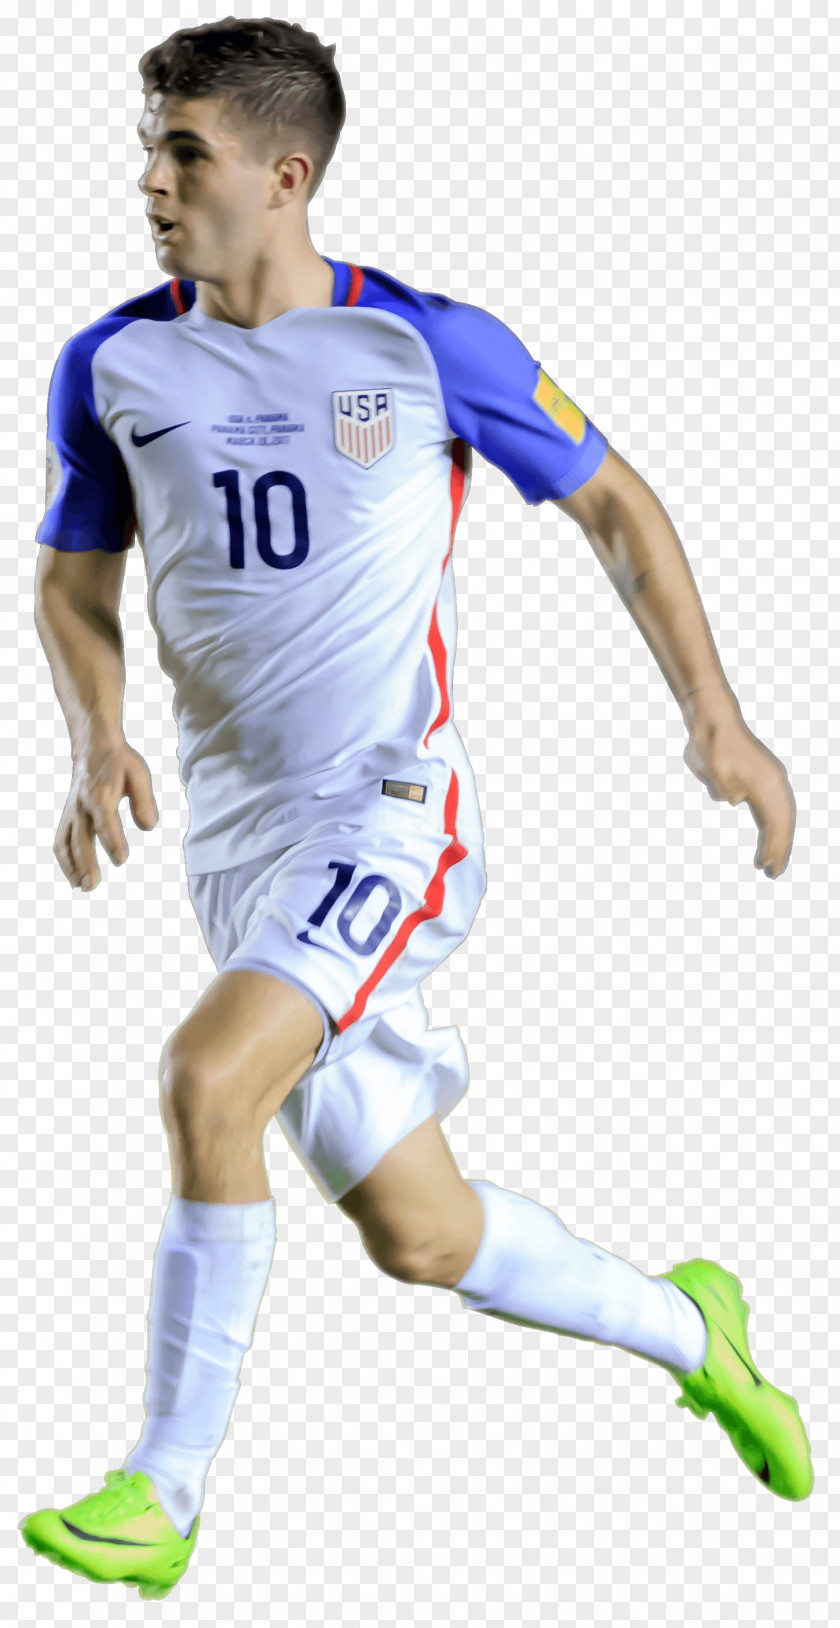 Football Christian Pulisic National Soccer Hall Of Fame United States Men's Team Player PNG